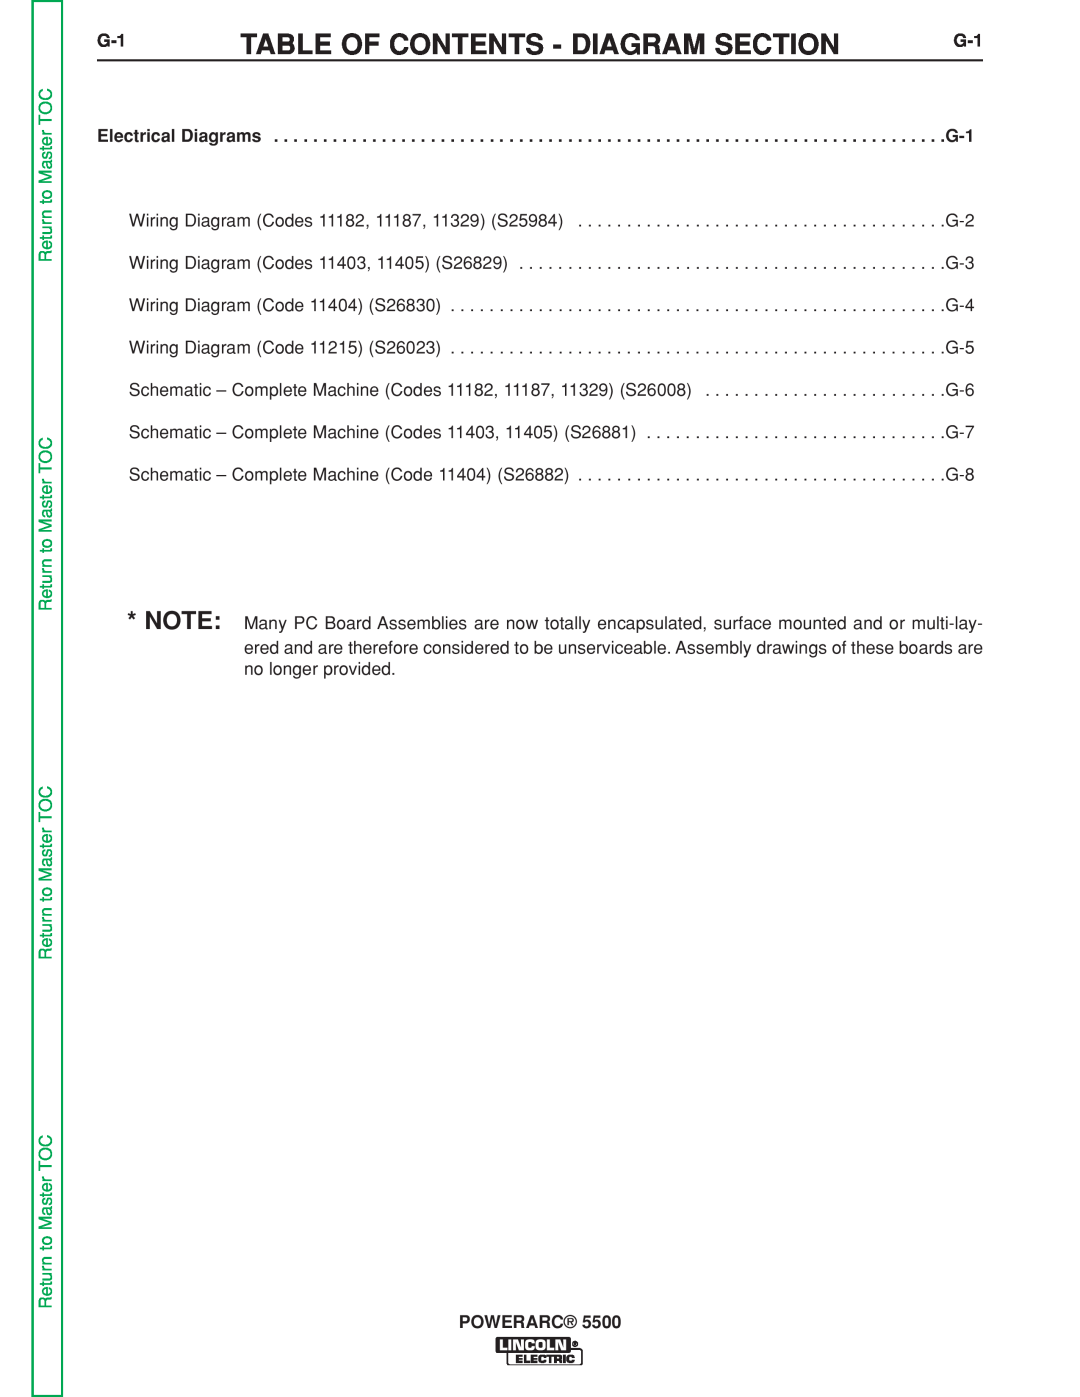 Lincoln Electric SVM197-A service manual Table Of Contents - Diagram Section, Return to Master TOC, Powerarc 